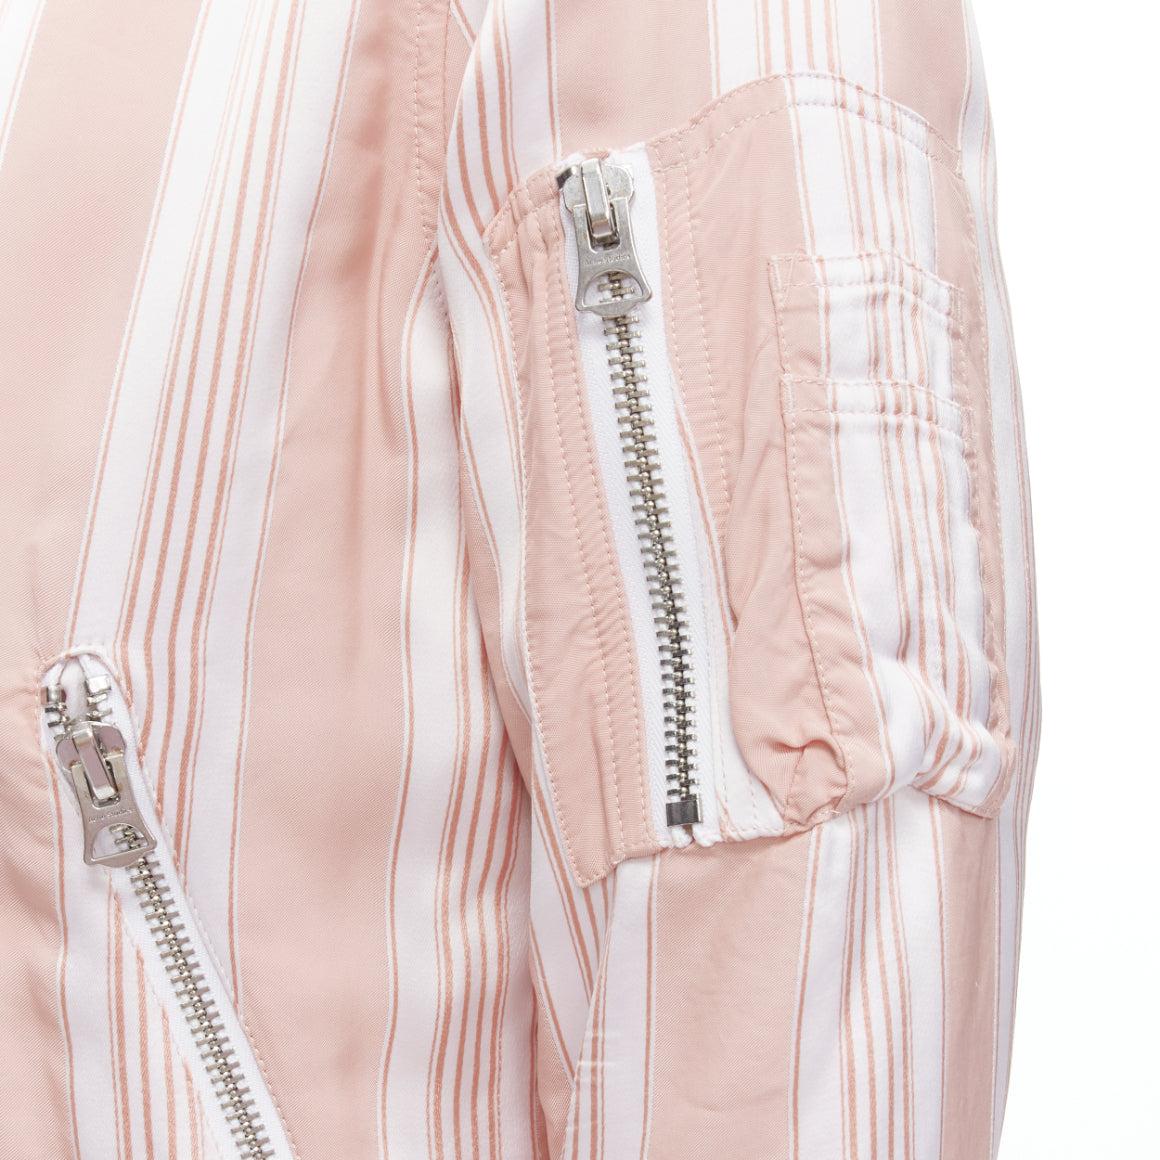 ACNE STUDIOS Varden 2016 pink white striped padded bomber jacket FR34 XS
Reference: KNCN/A00014
Brand: Acne Studios
Model: Varden
Collection: 2016
Material: Viscose
Color: Pink, White
Pattern: Striped
Made in: Lithuania

CONDITION:
Condition: Very